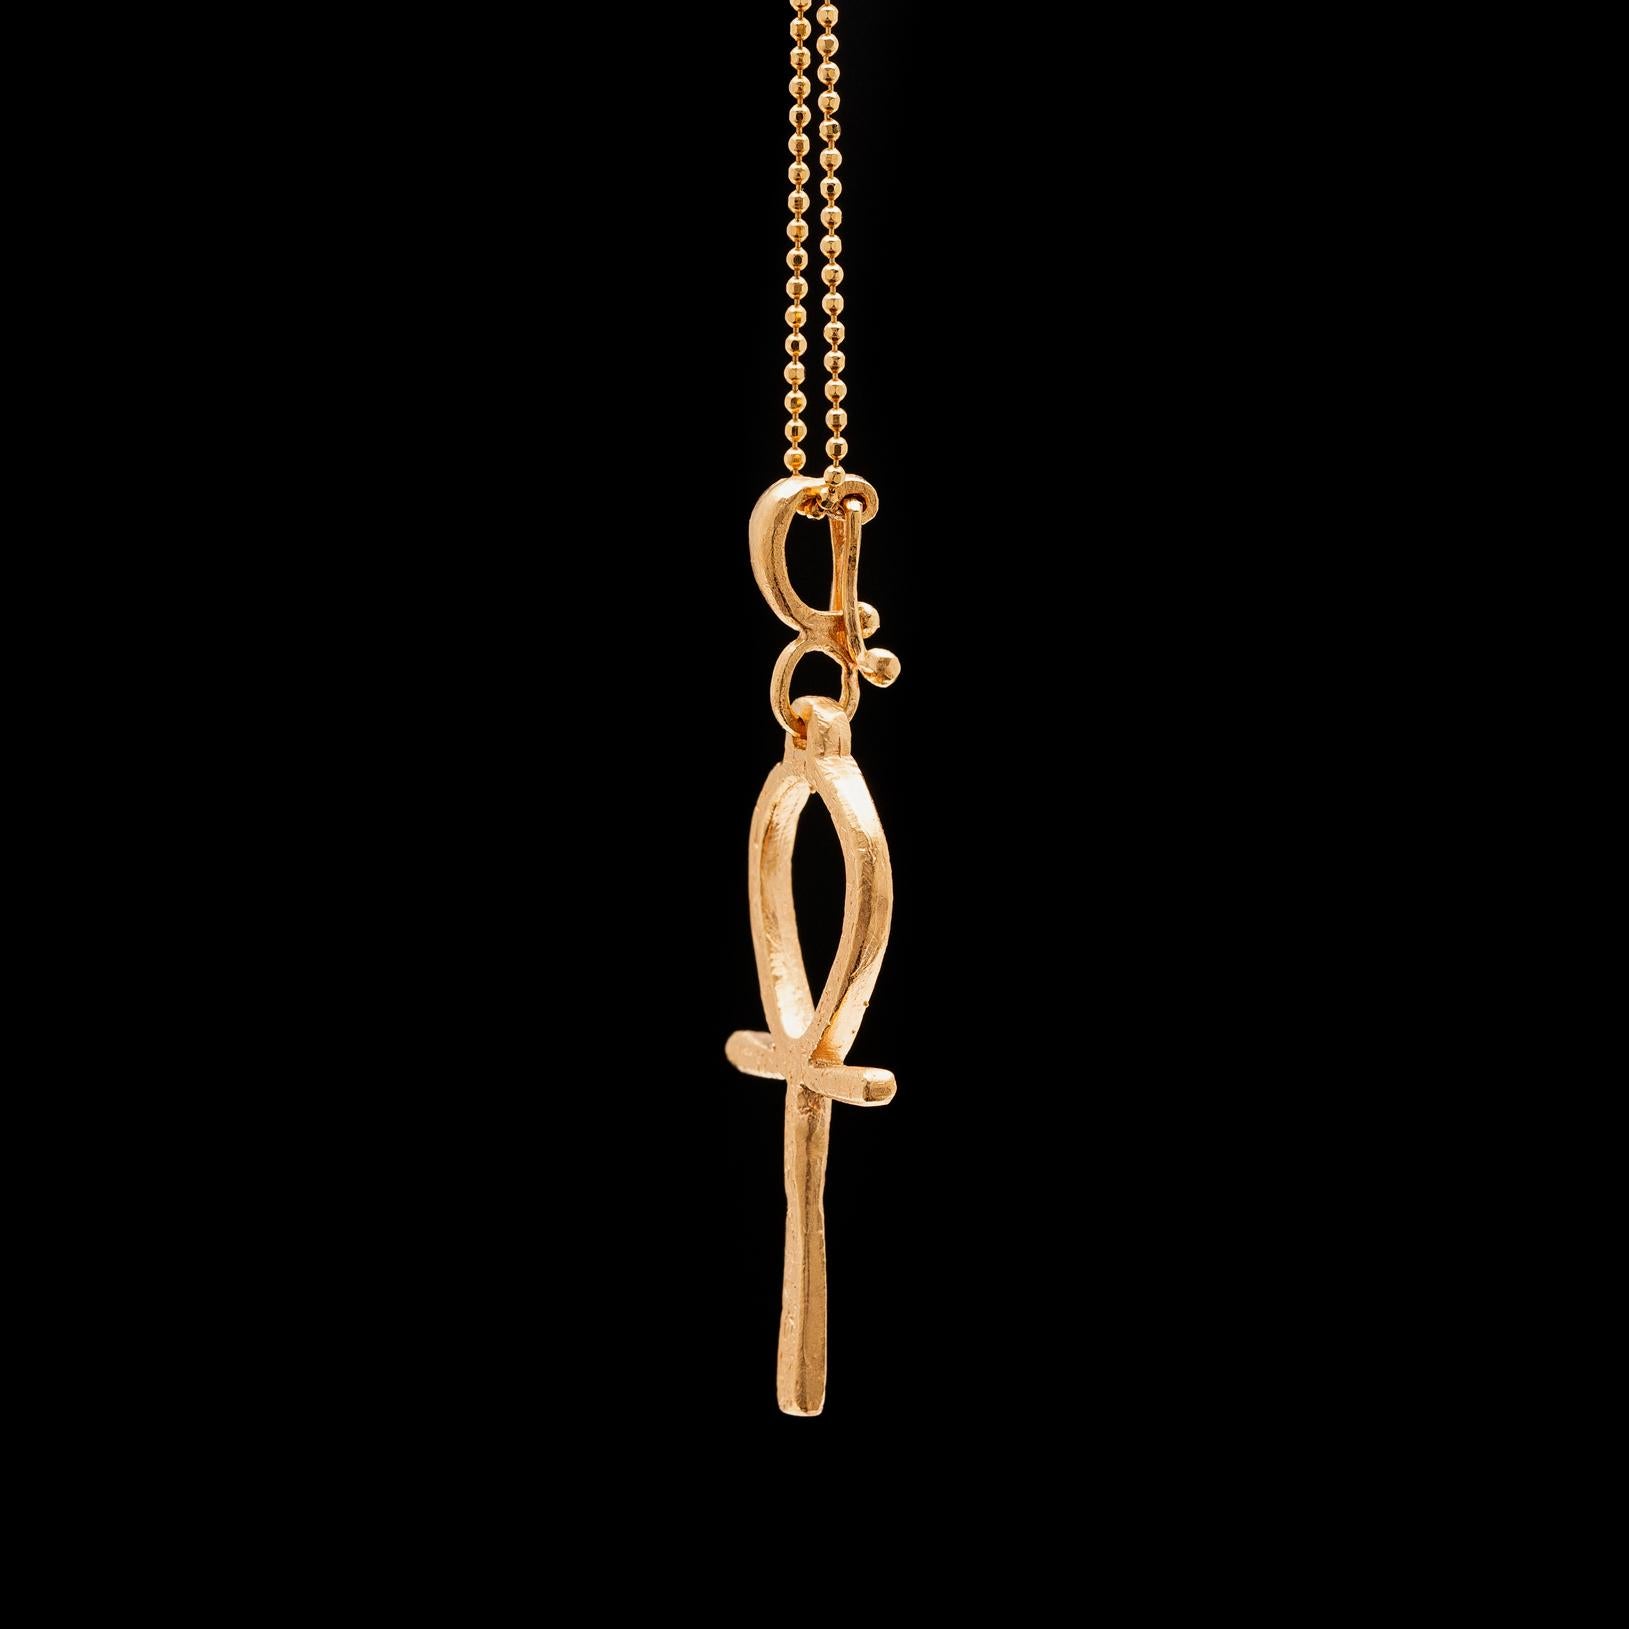 Egyptian Revival Dominique Cohen Boho Ankh Key of Life Pendant and Chain